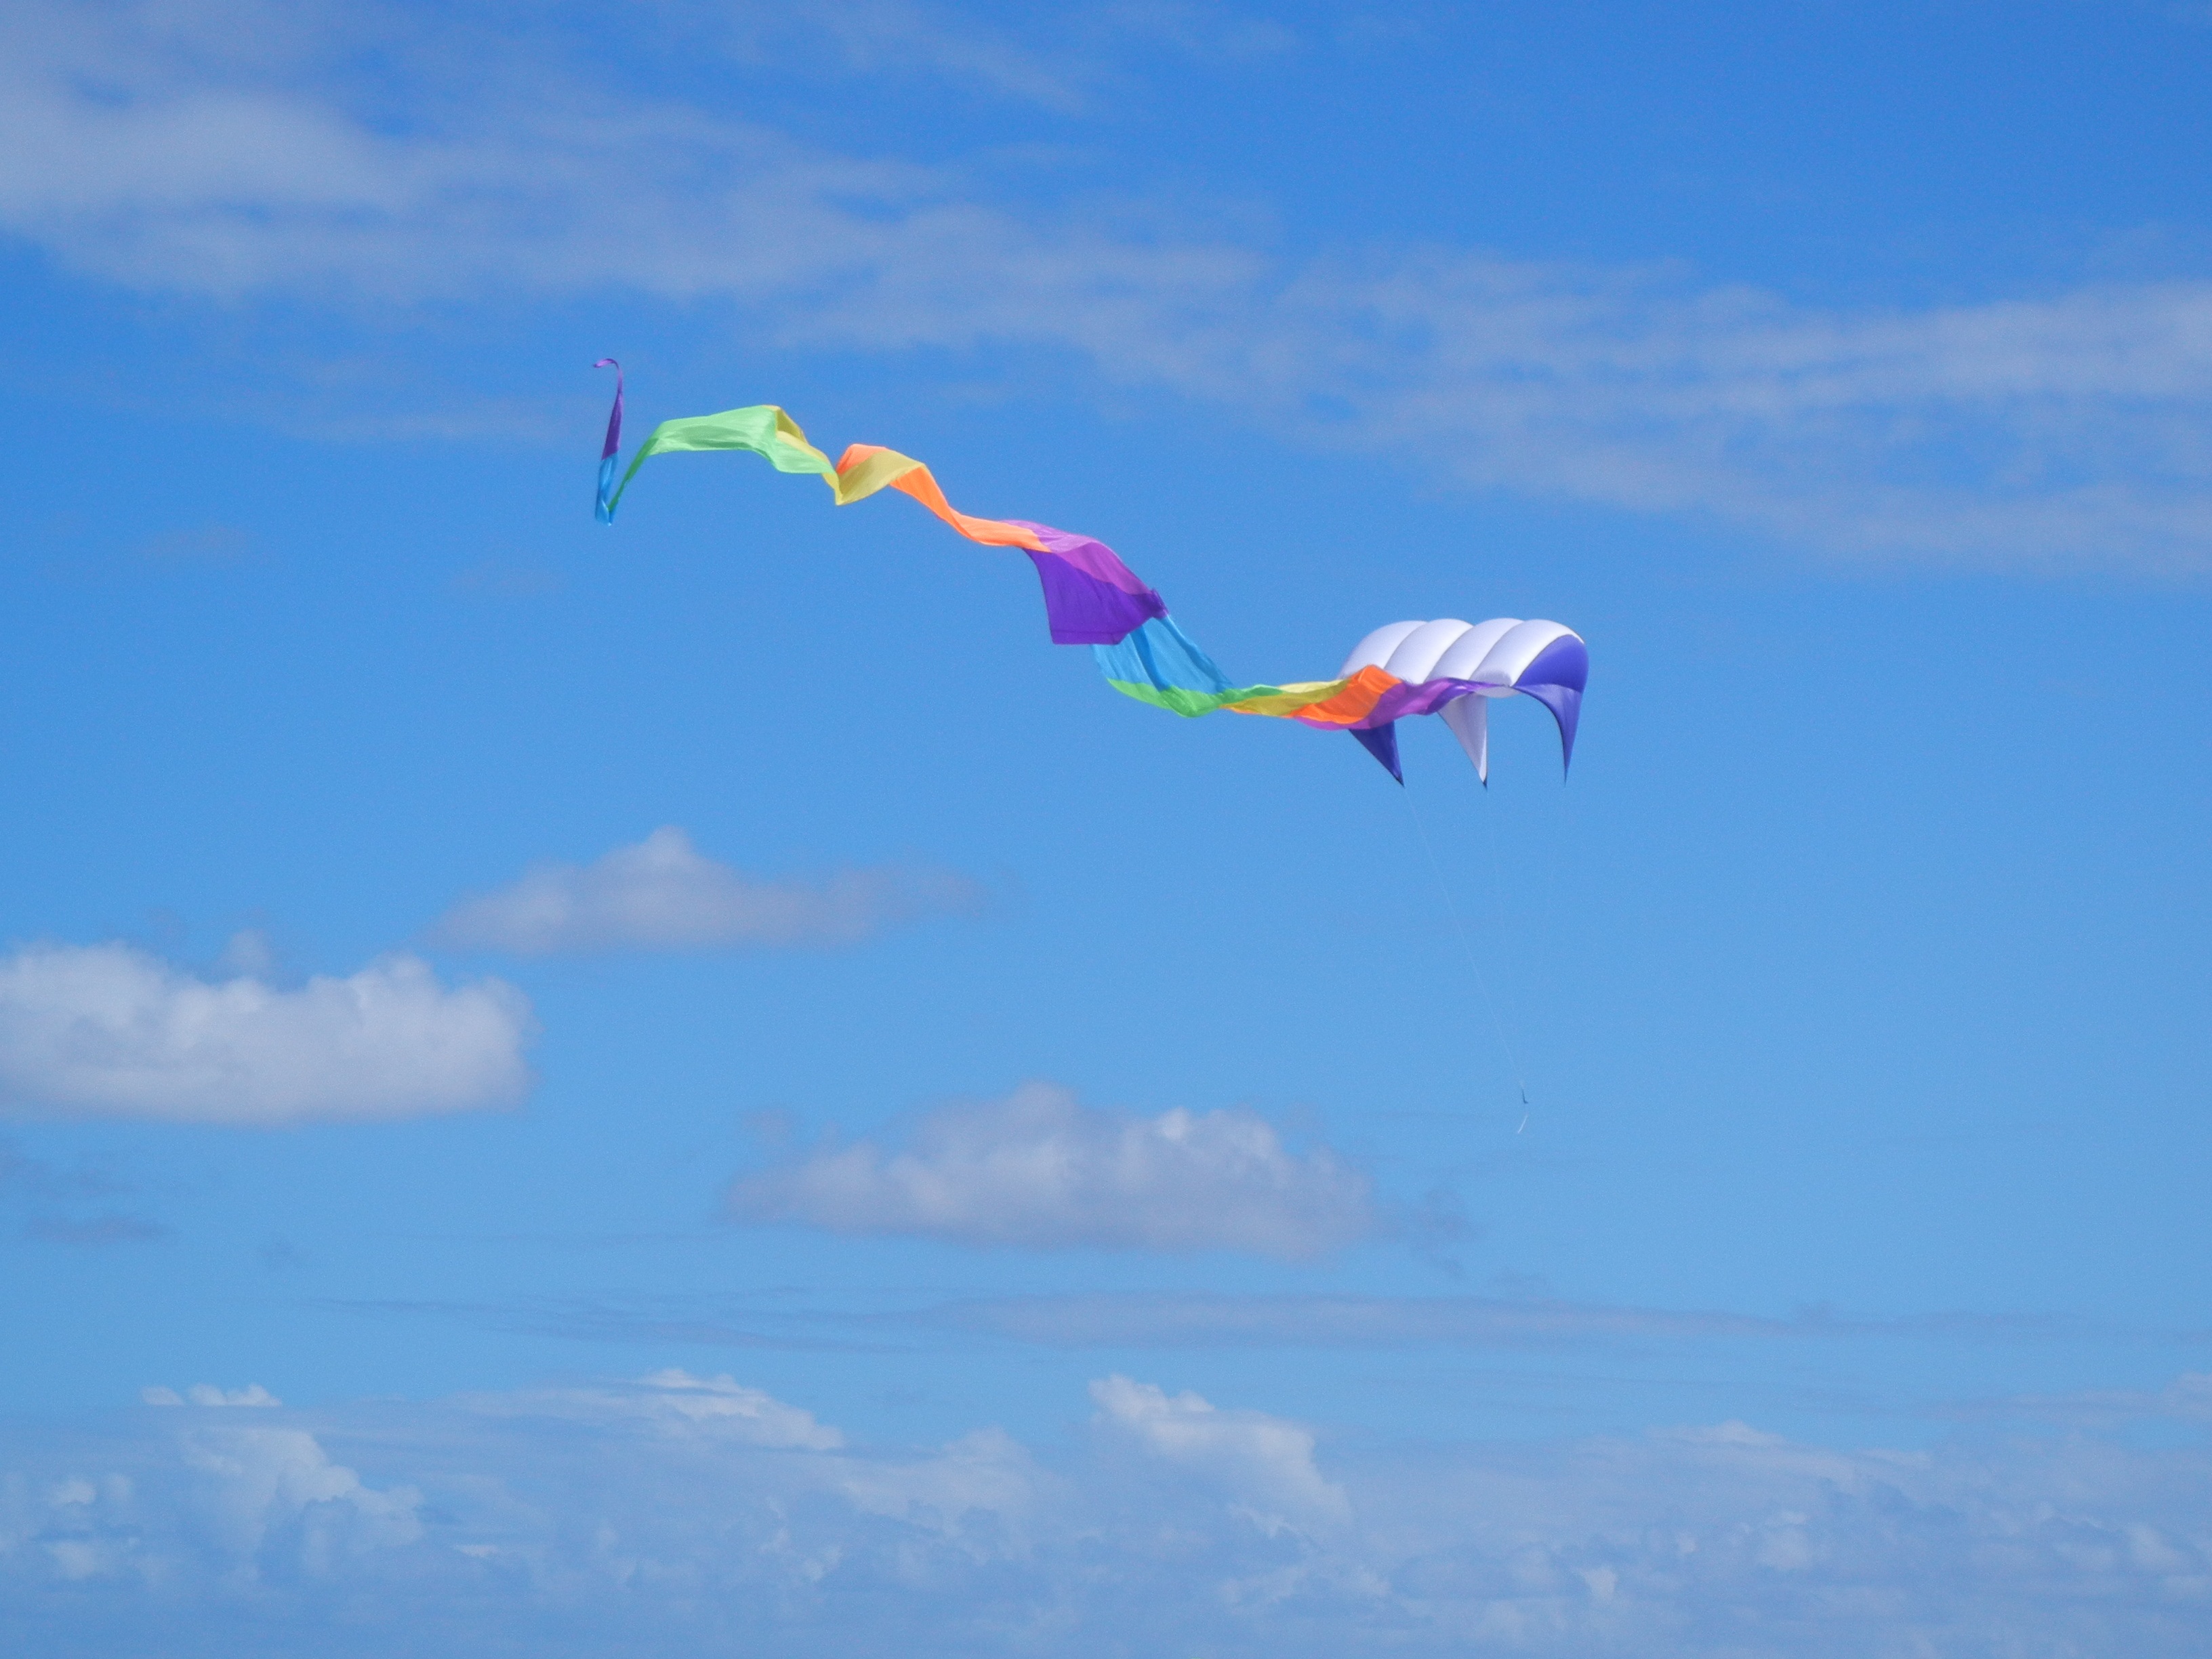 Download wallpaper 3264x2448 kite flying, sky, clouds hd background